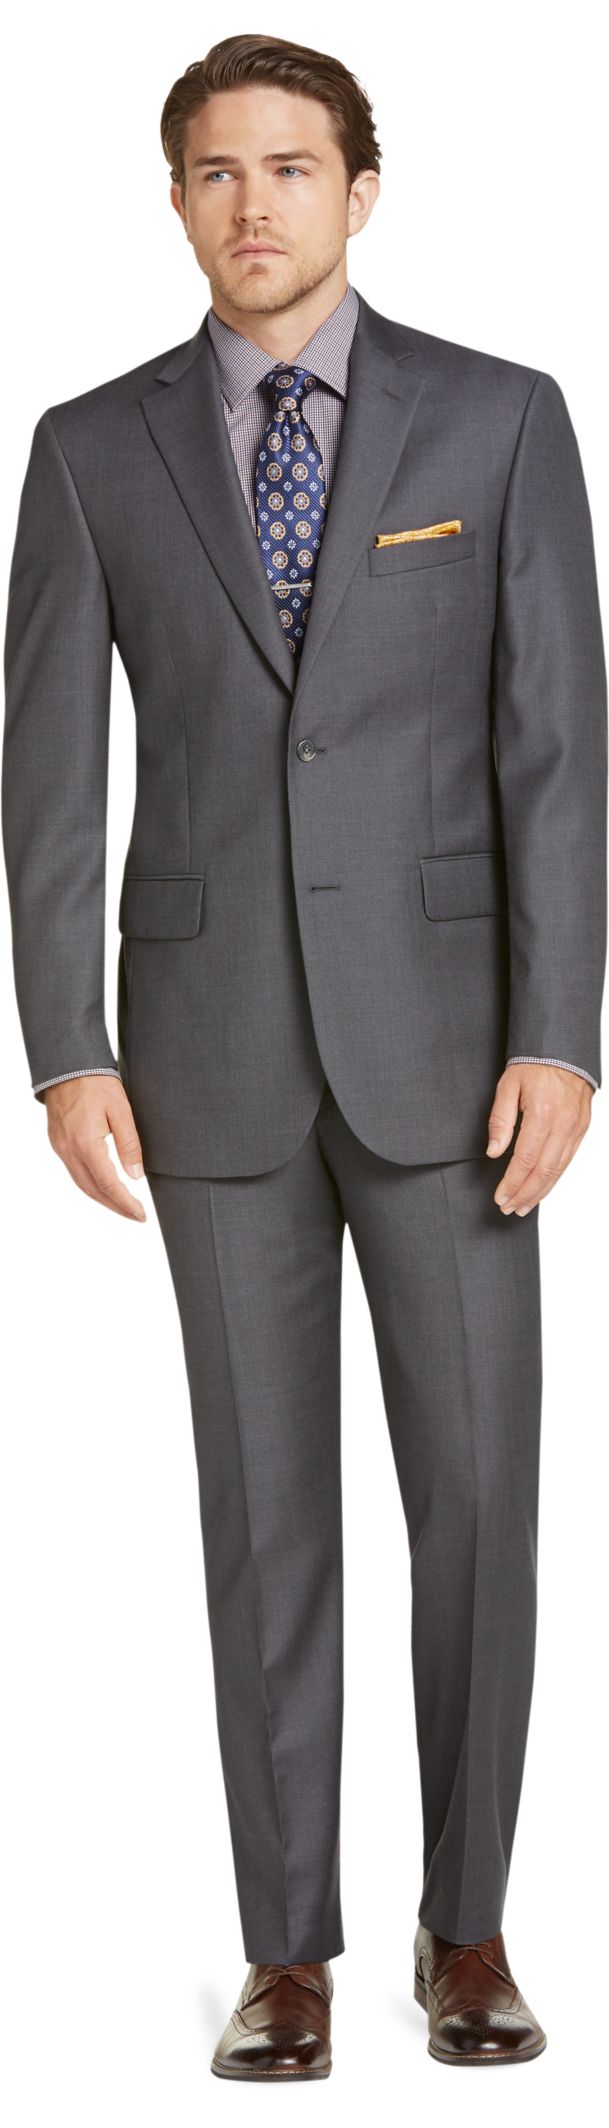 Buy business suits with variations in attractive styles